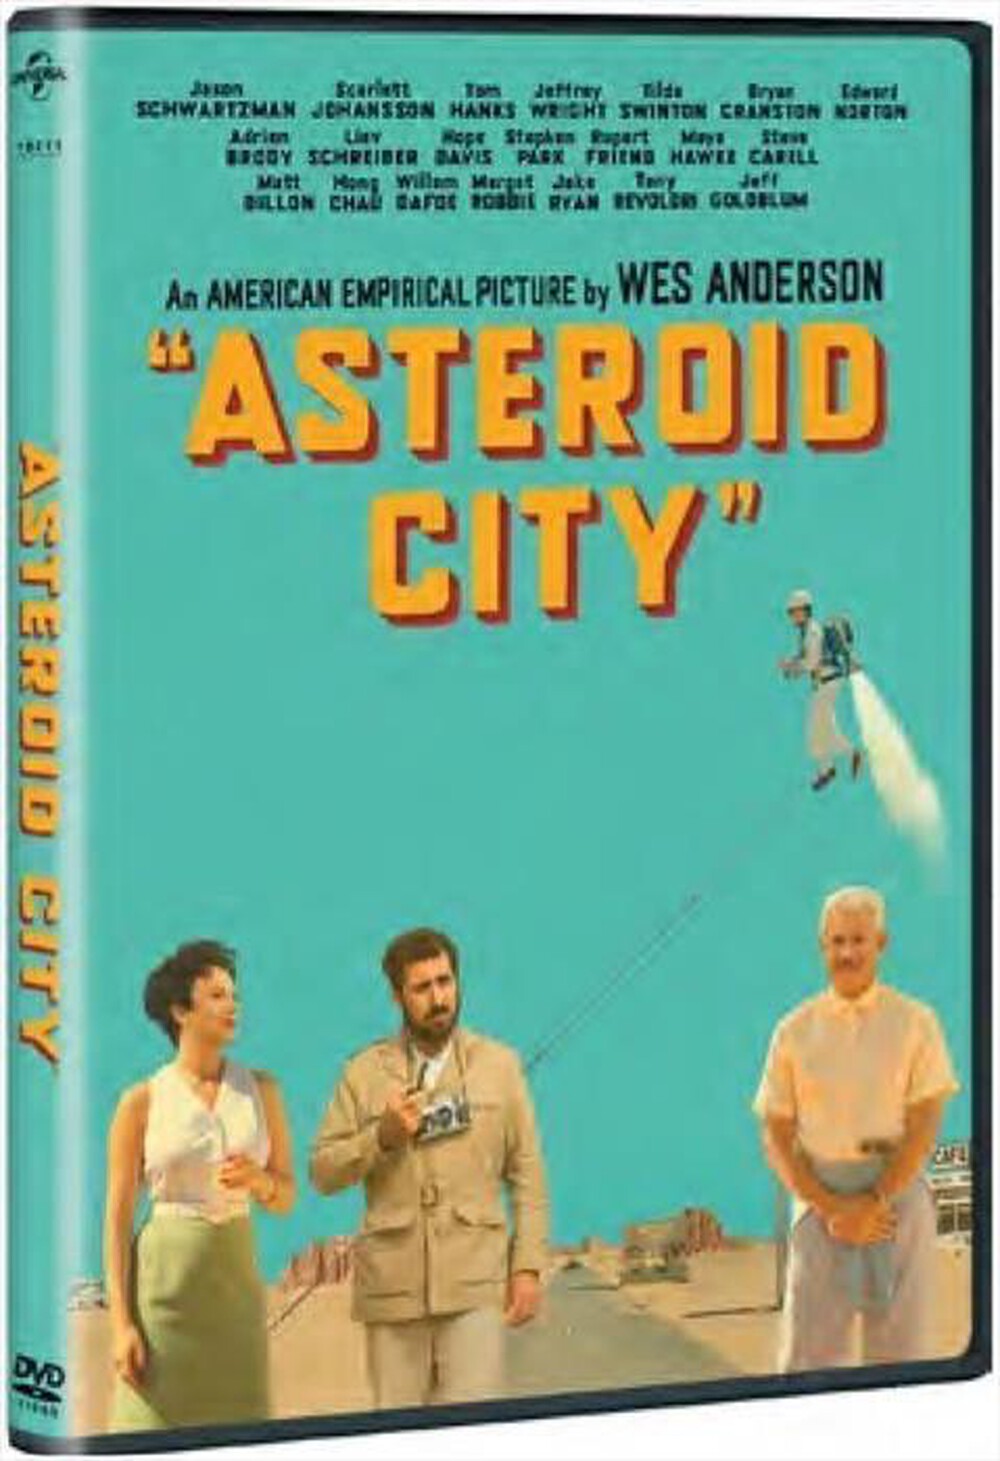 "UNIVERSAL PICTURES - Asteroid City"